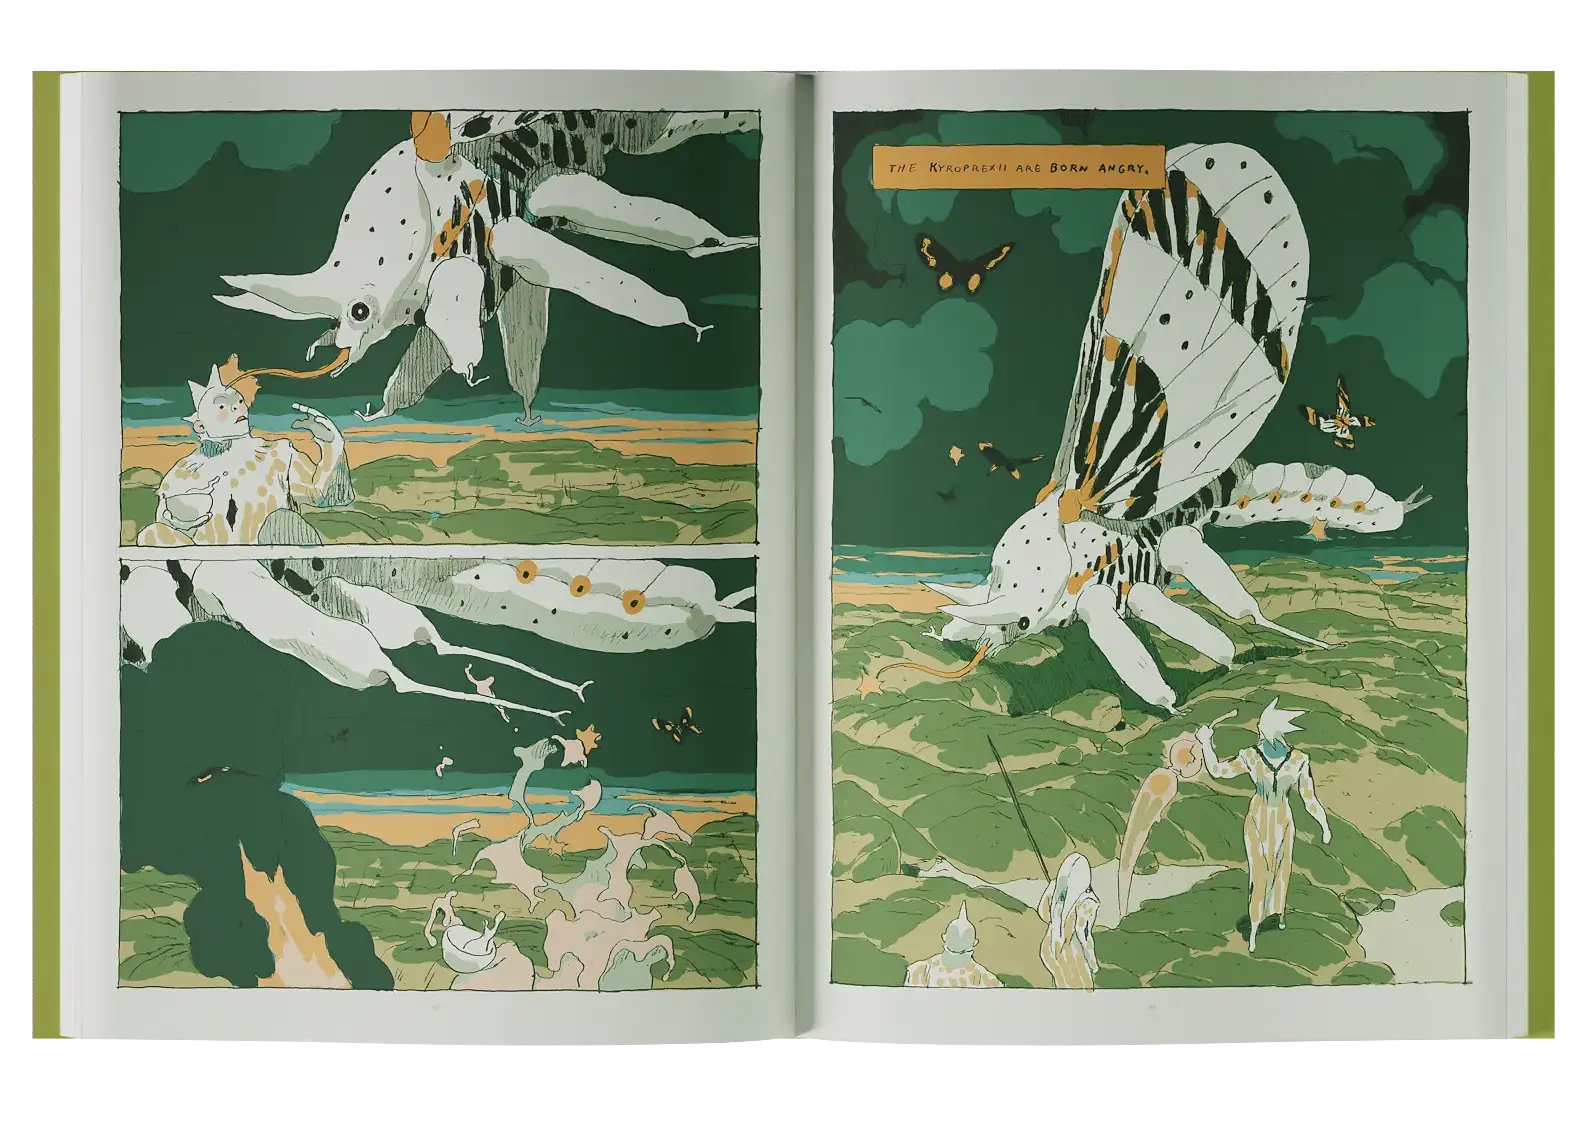 Spread from interiors of the book.